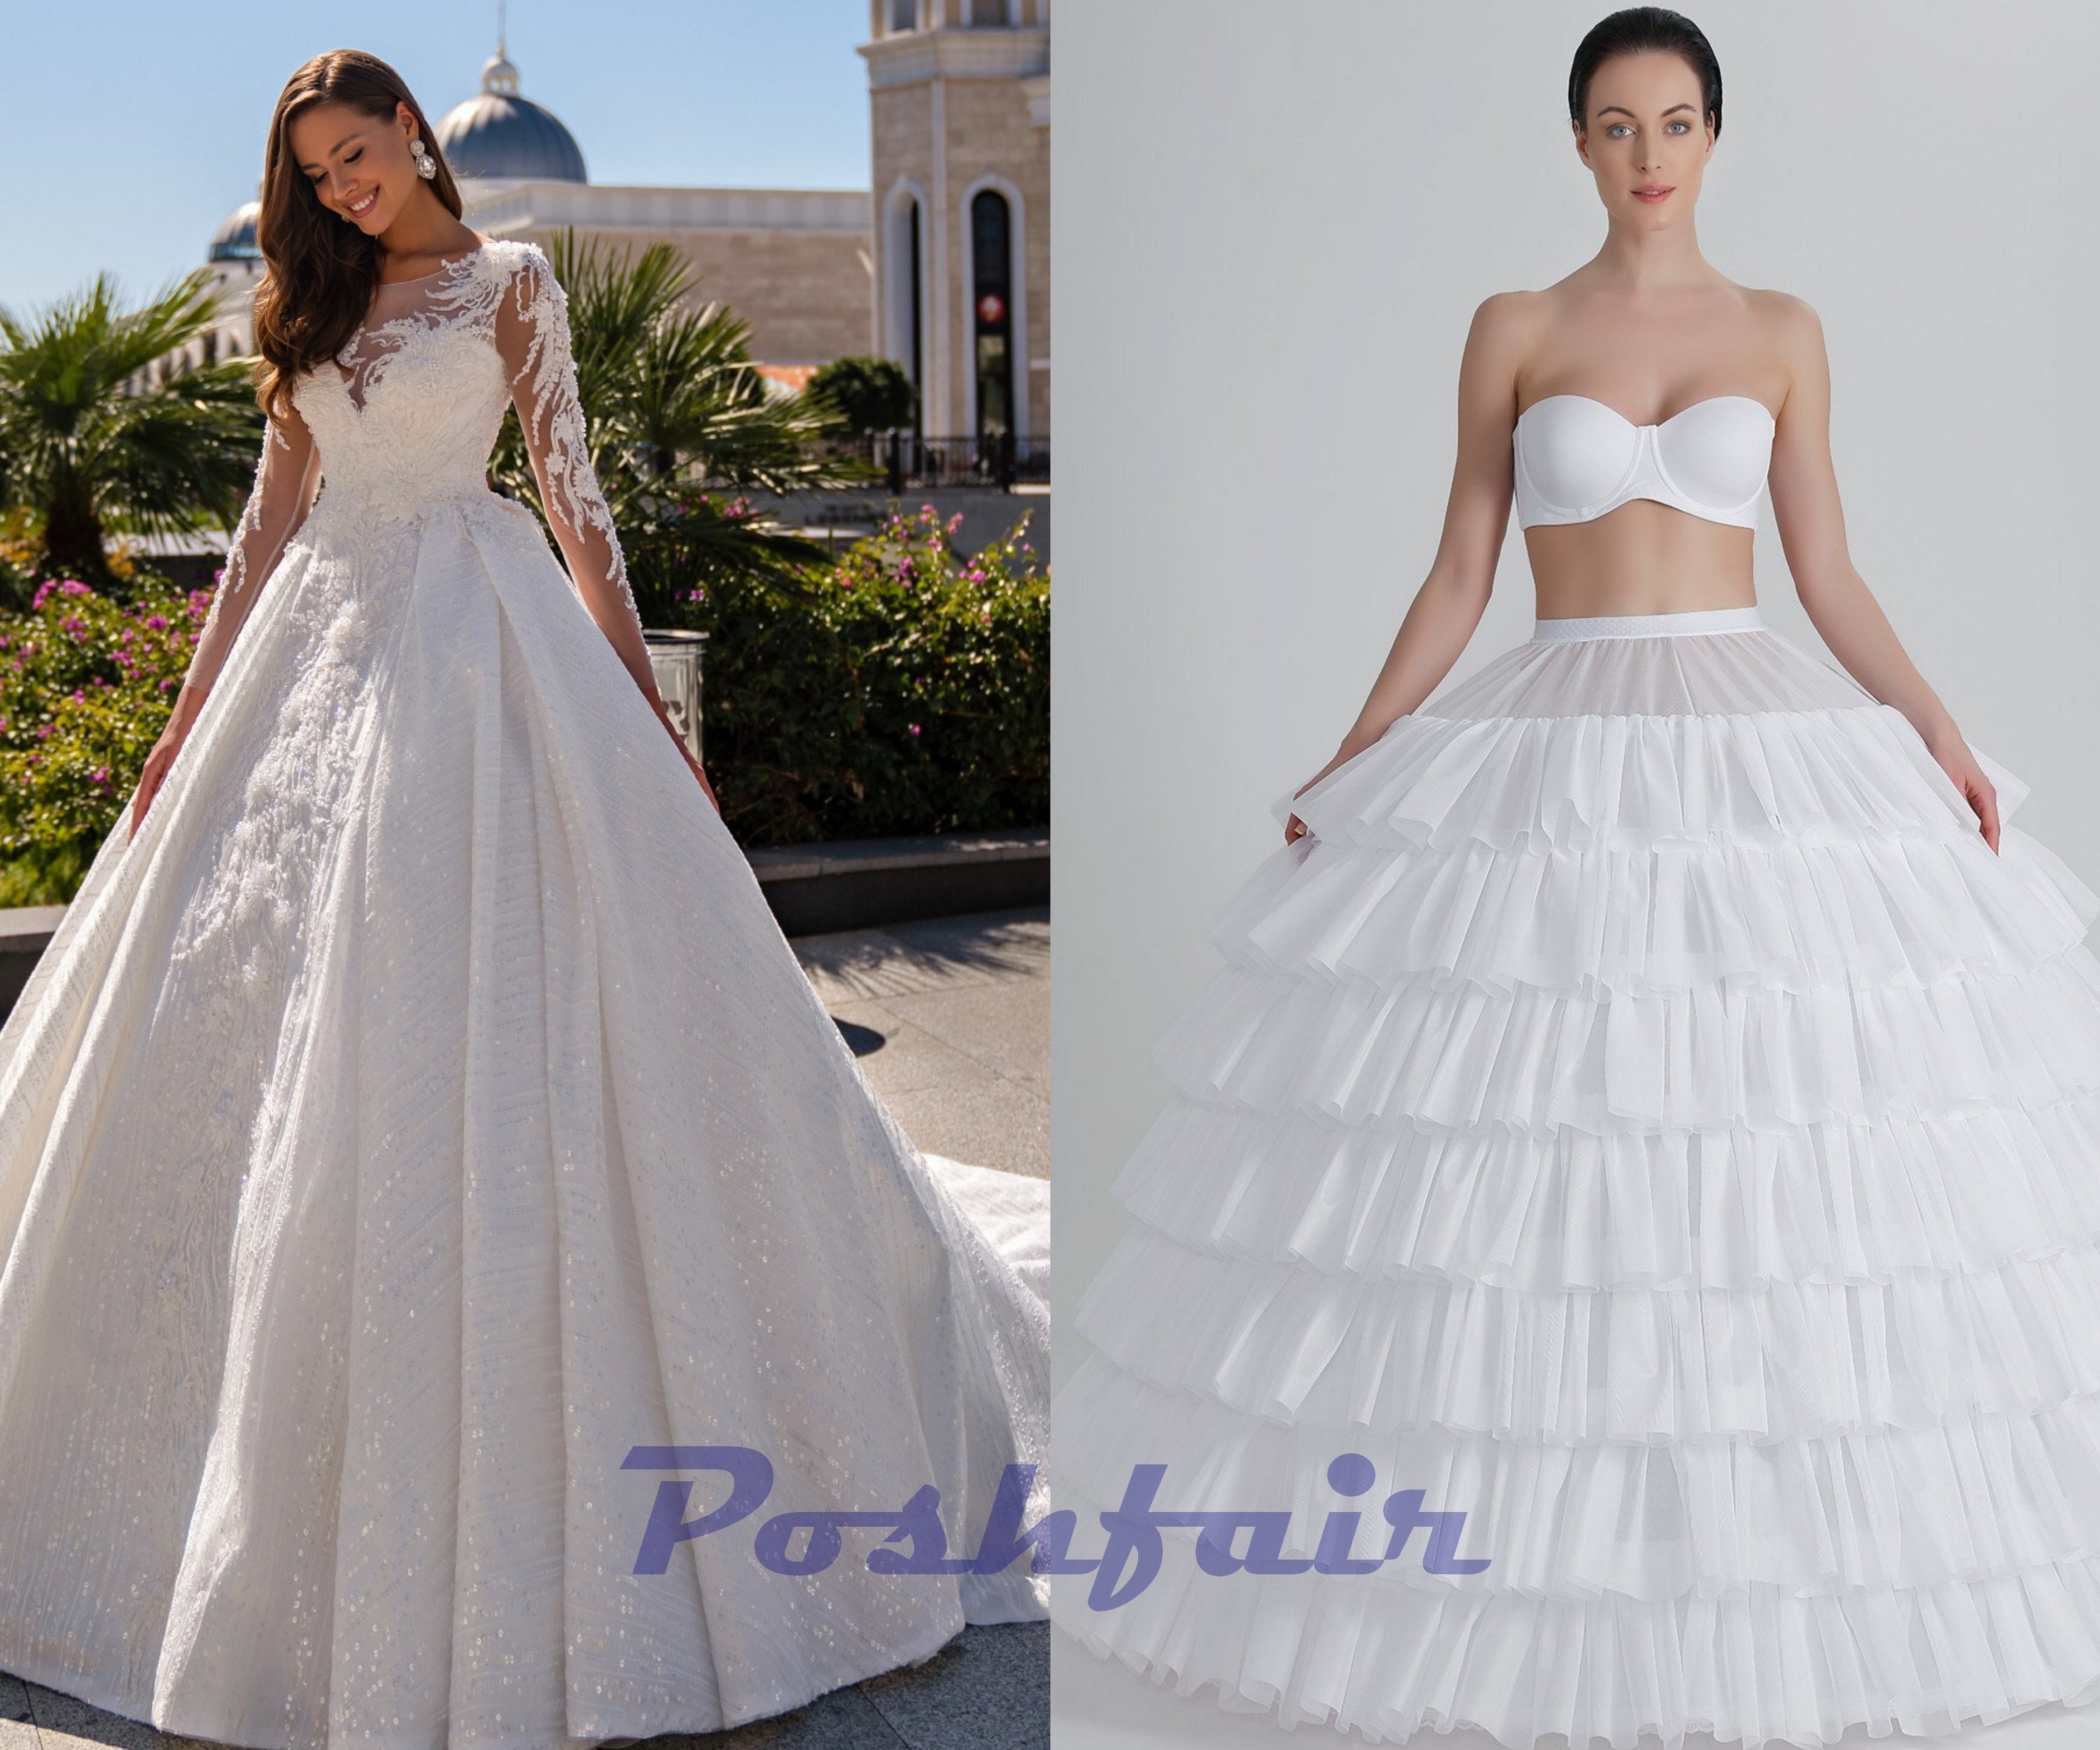 What do you put under a wedding dress to make it poofy? - Quora